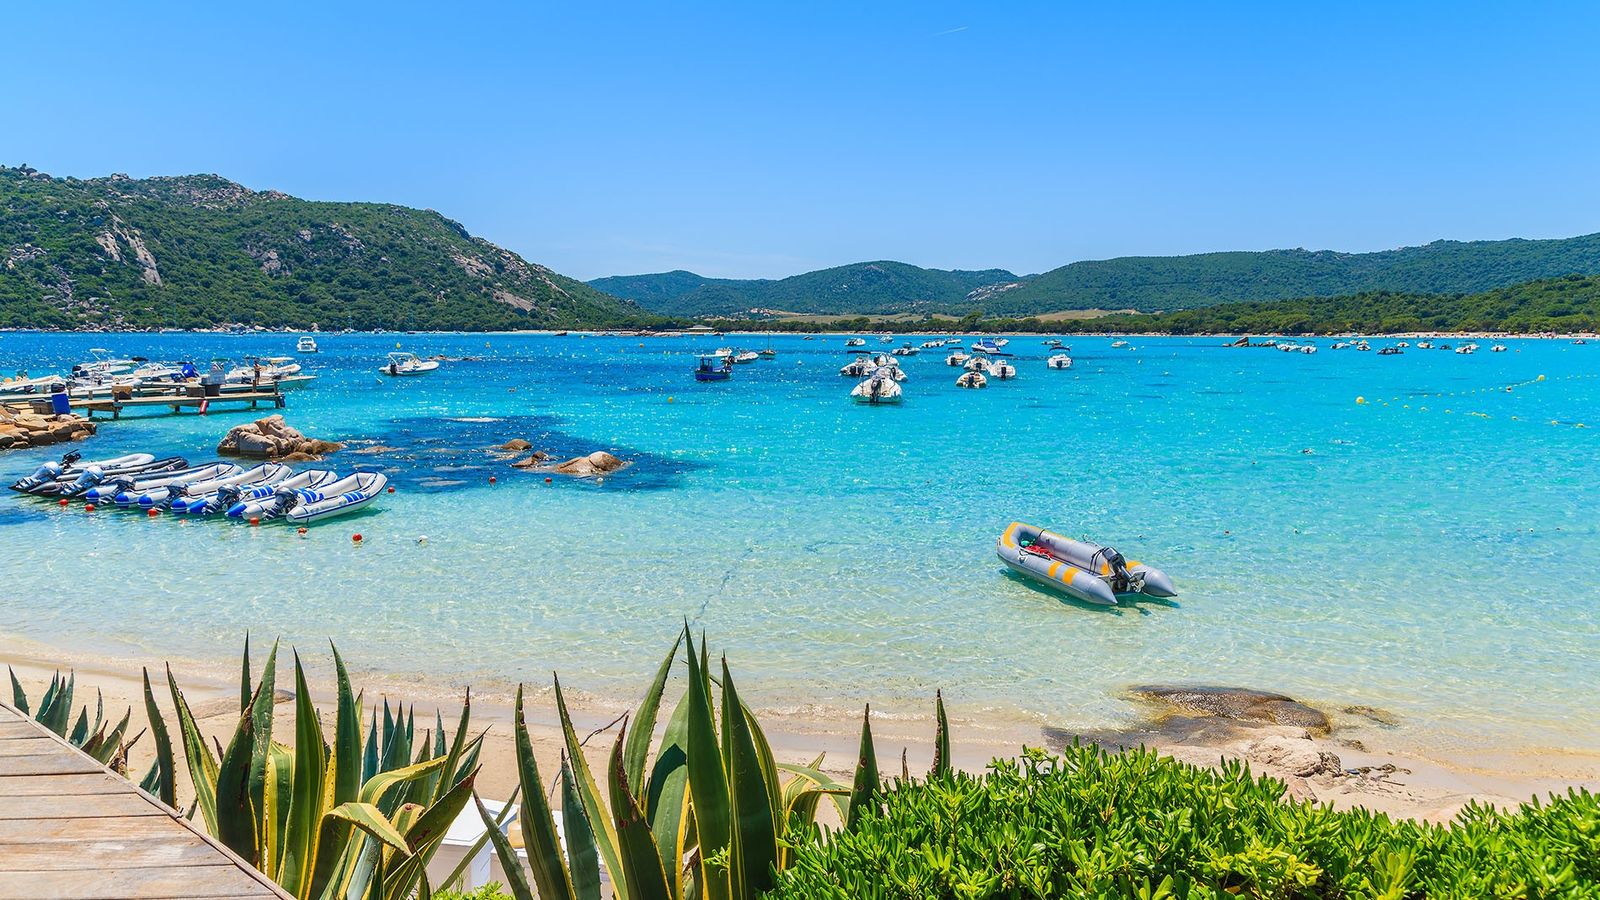 The Corsica beach with mini boats surrounded by mountains